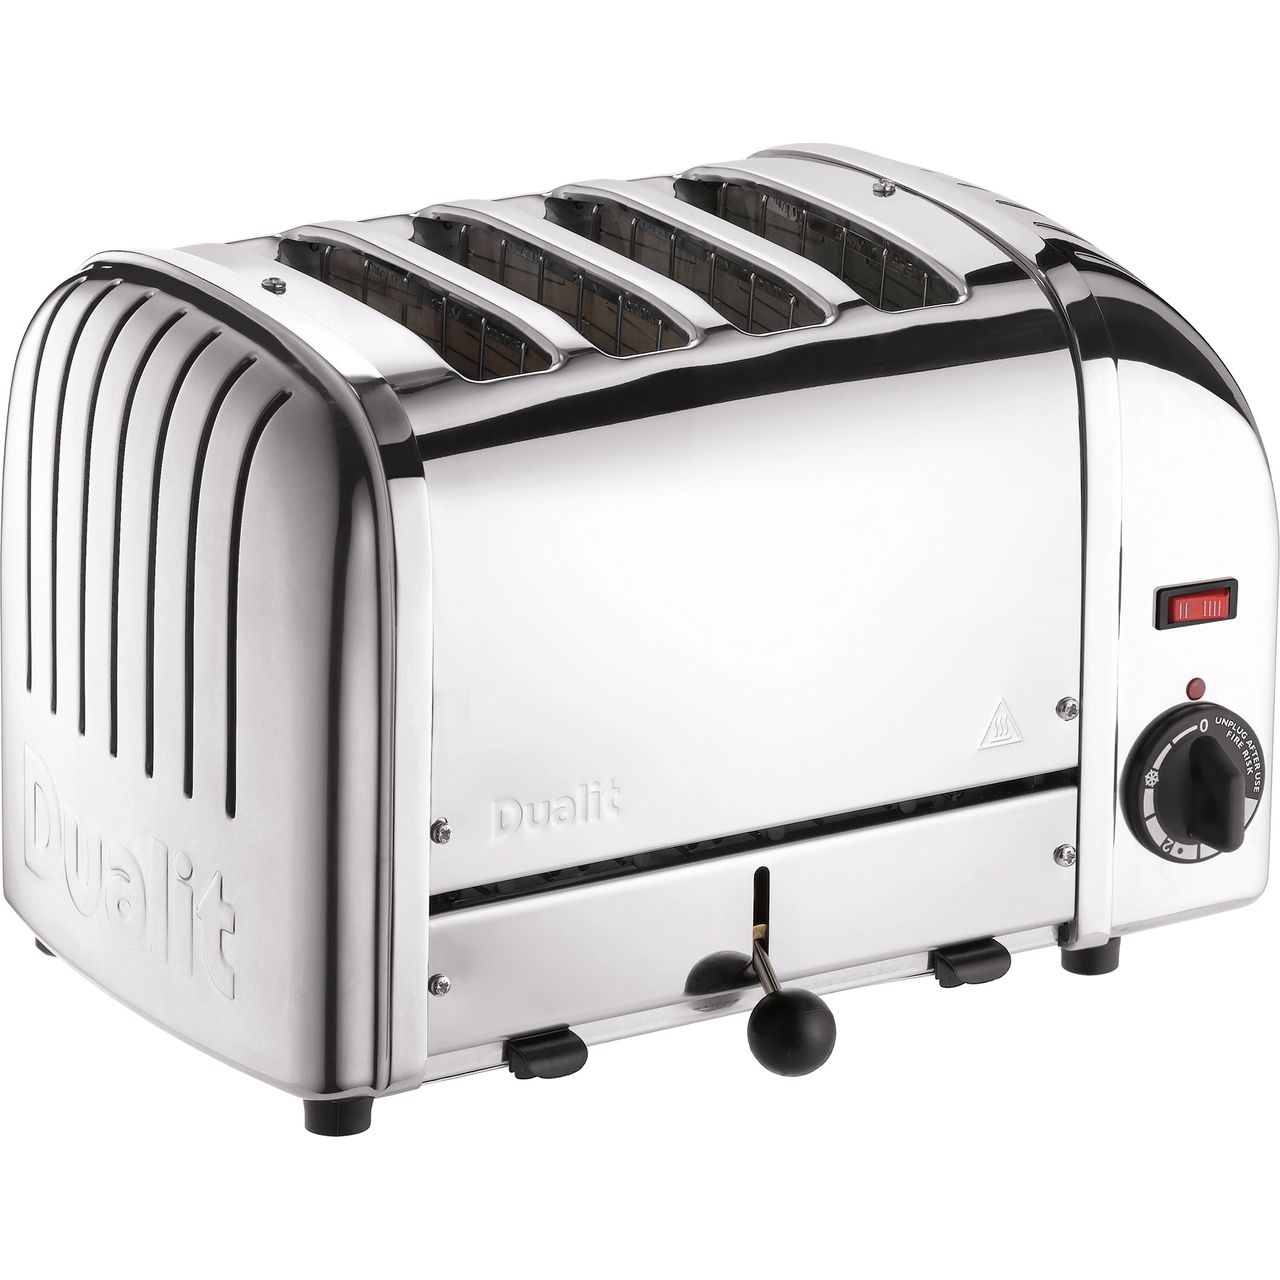 Dualit Architect Toaster review